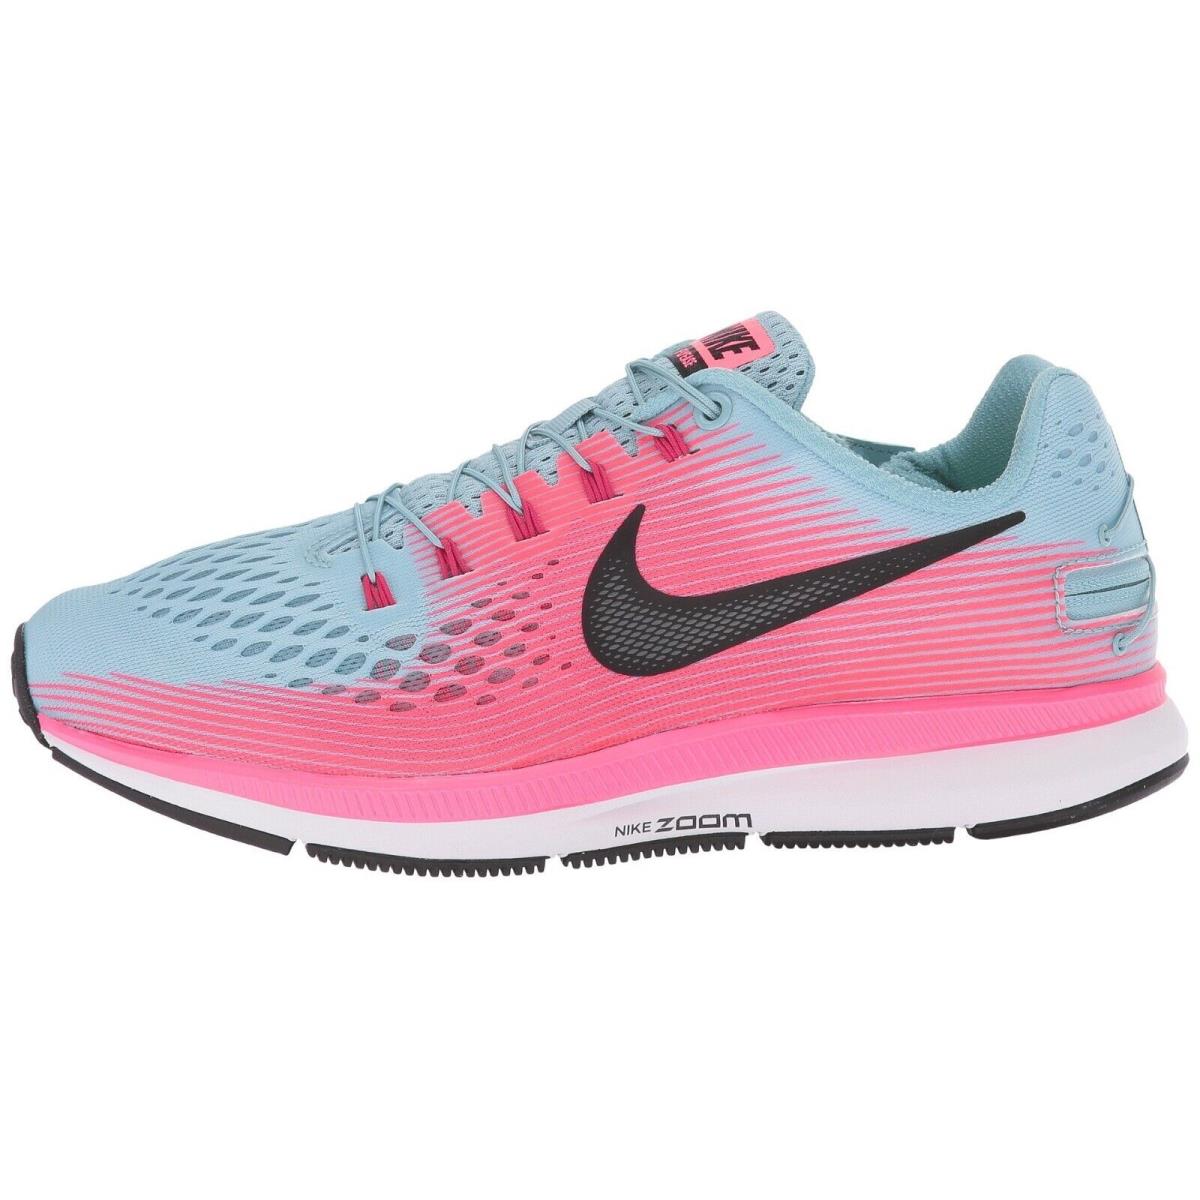 Nike Air Zoom Pegasus 34 Flyease WD Womens Size 5 - 904677-406 Mica Blue Pink